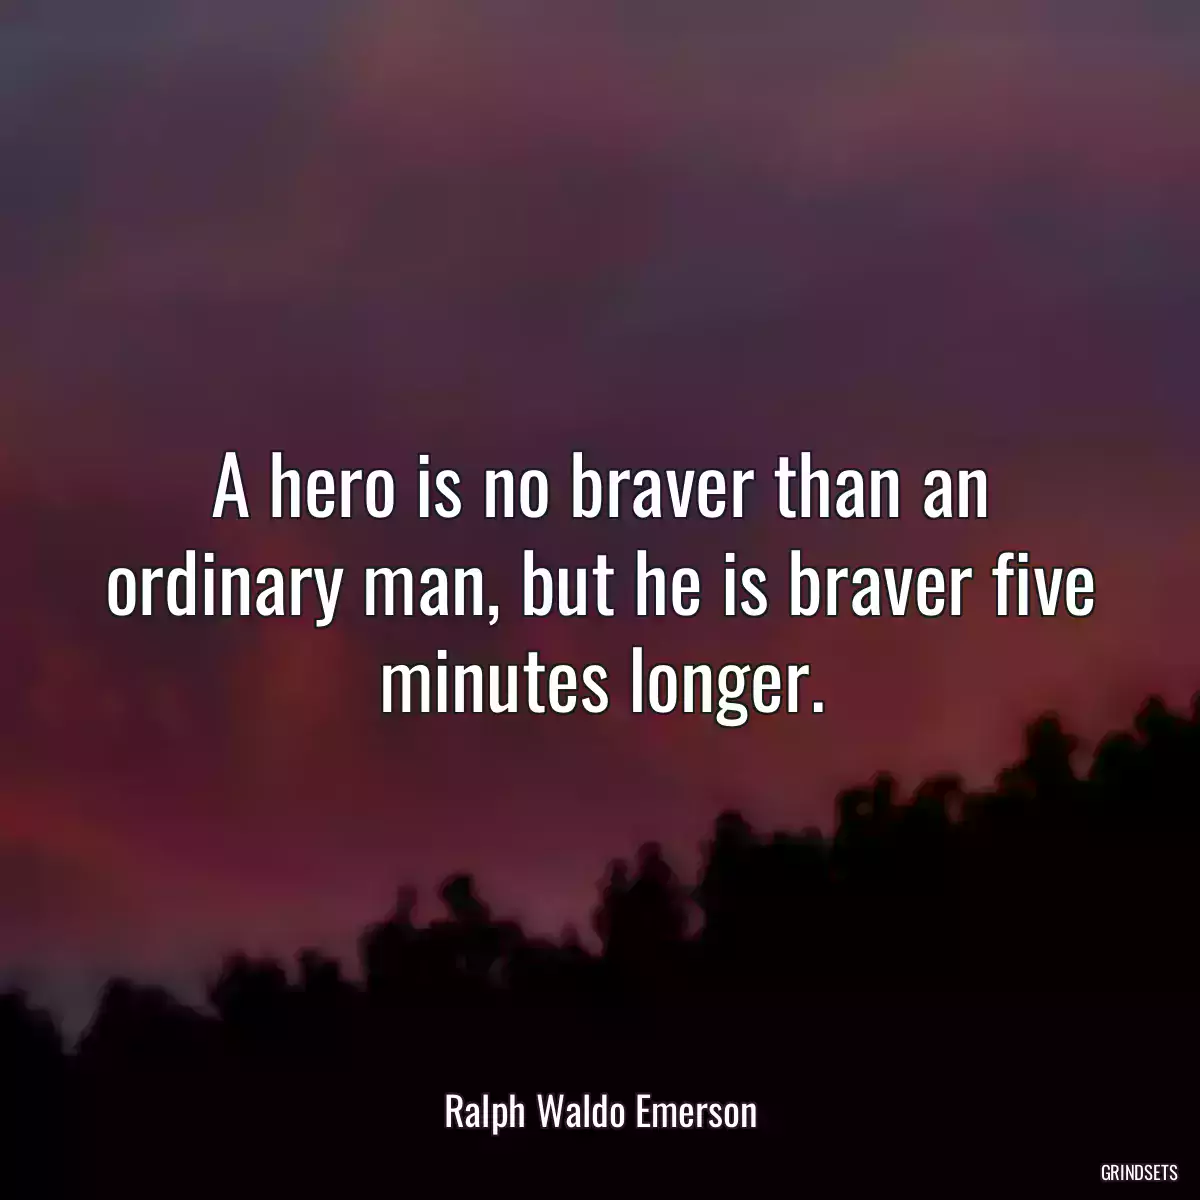 A hero is no braver than an ordinary man, but he is braver five minutes longer.